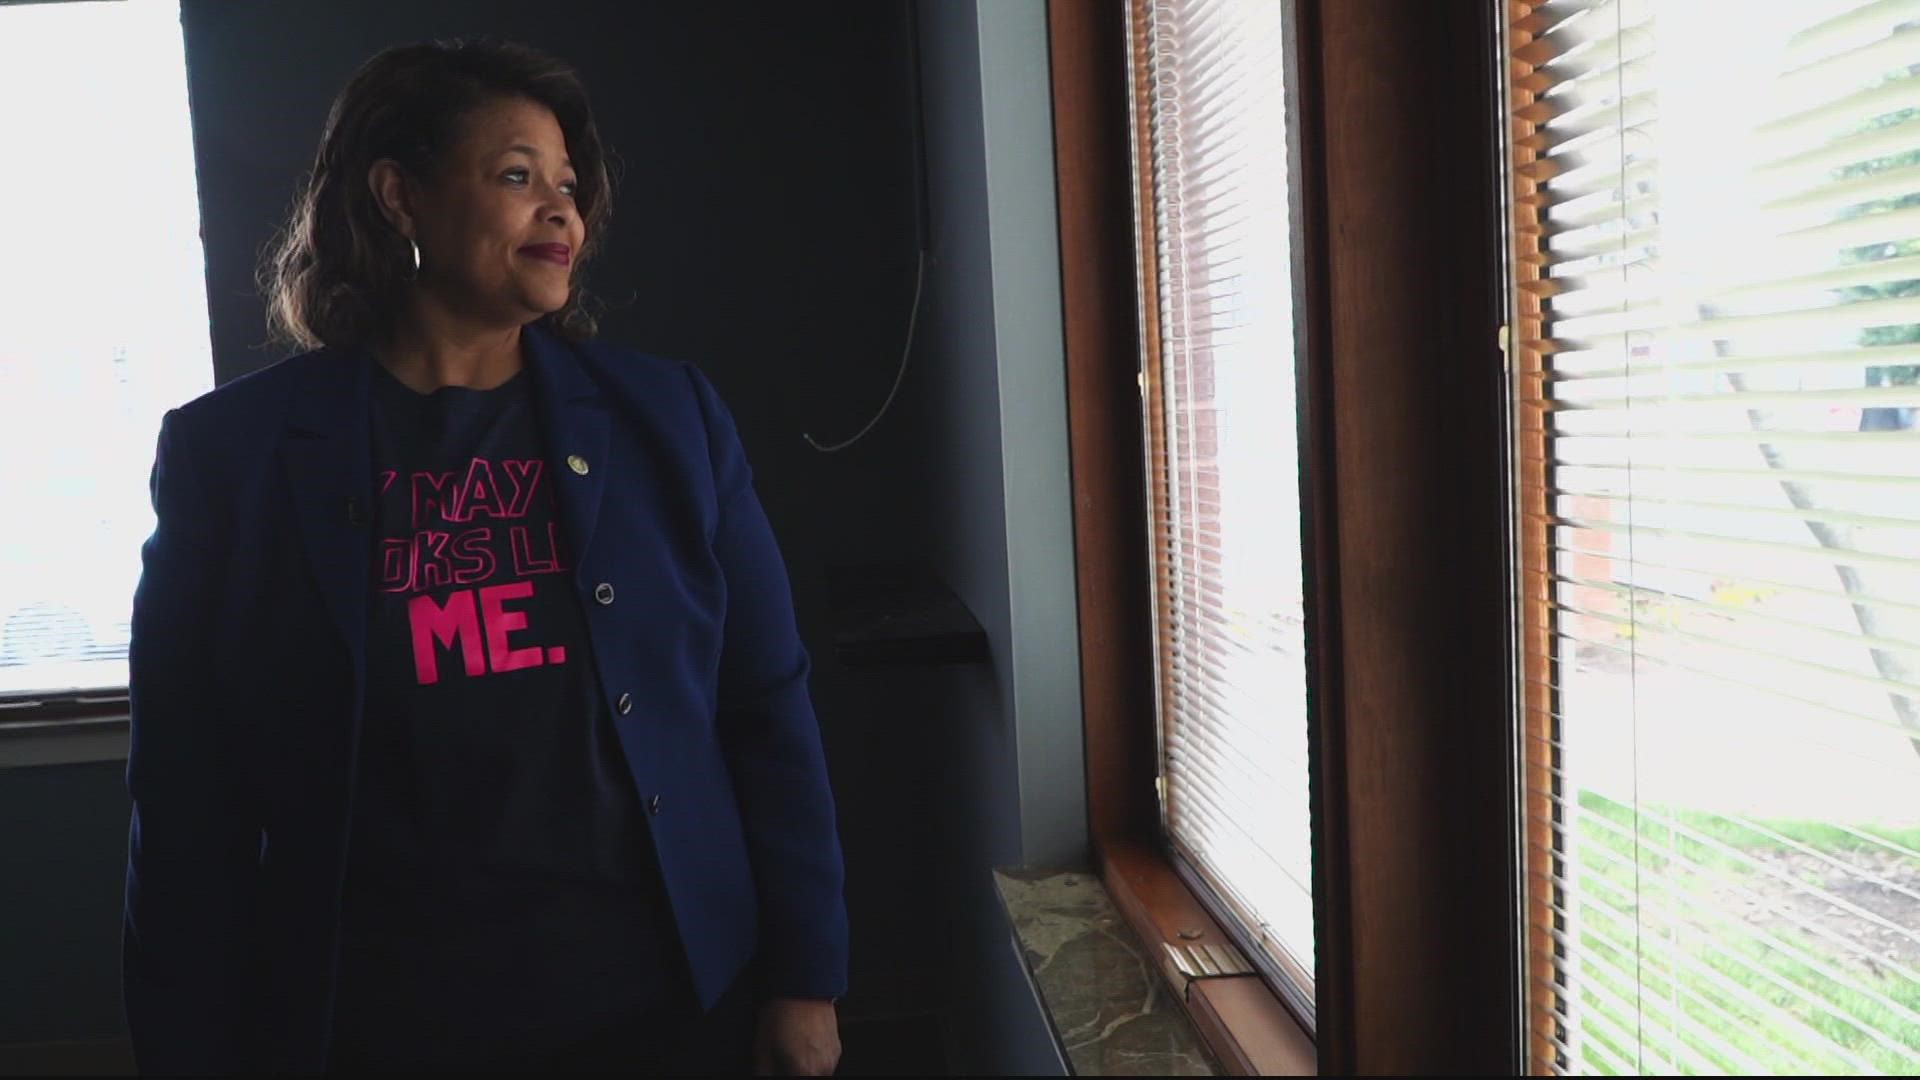 Manassas’ first Black female mayor started to program to encourage others to follow her lead.